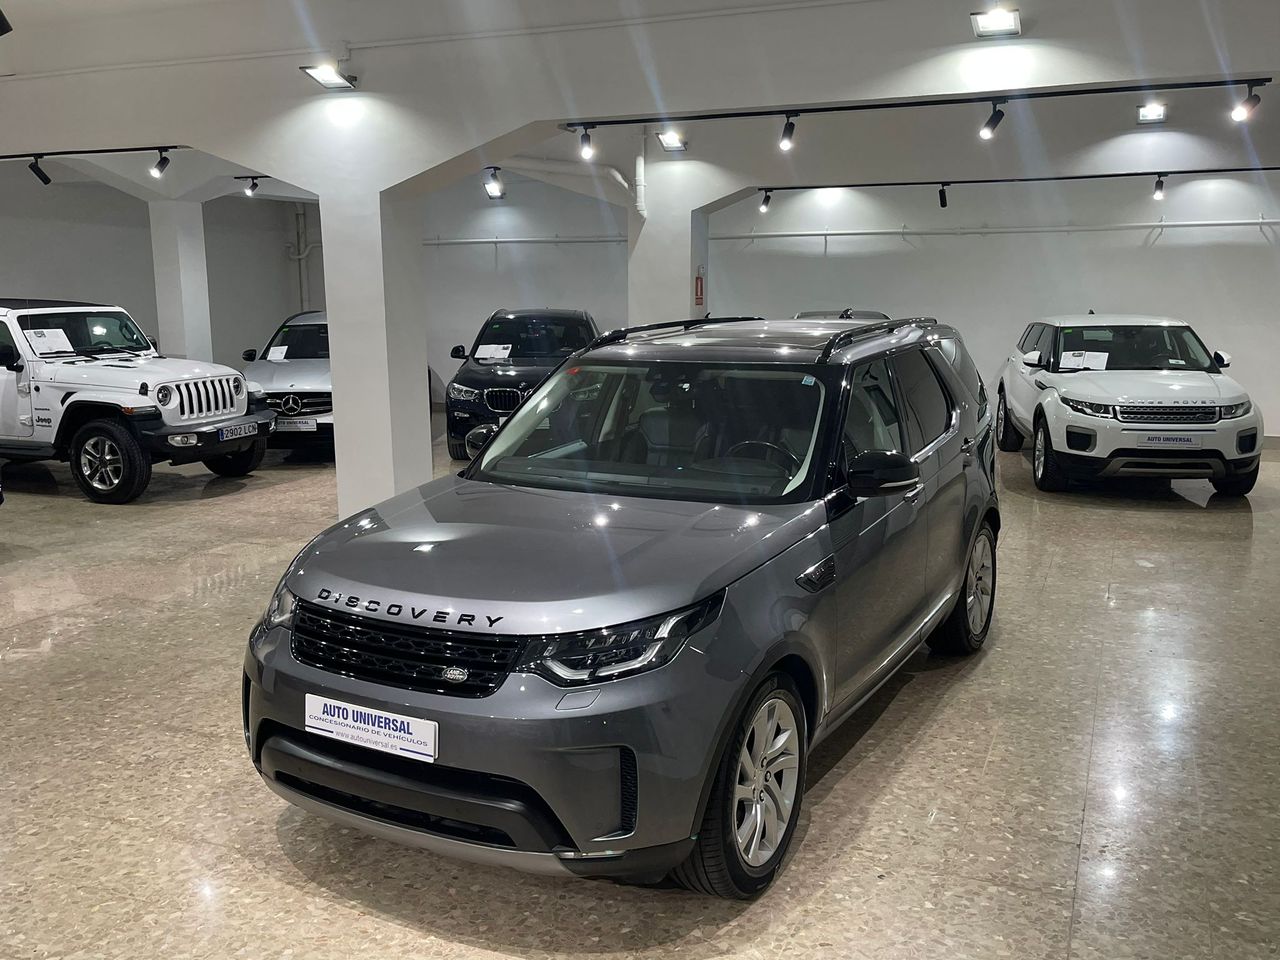 Land-Rover Discovery Discovery 3.0 TD6 190kW 258CV HSE Auto   - Foto 1